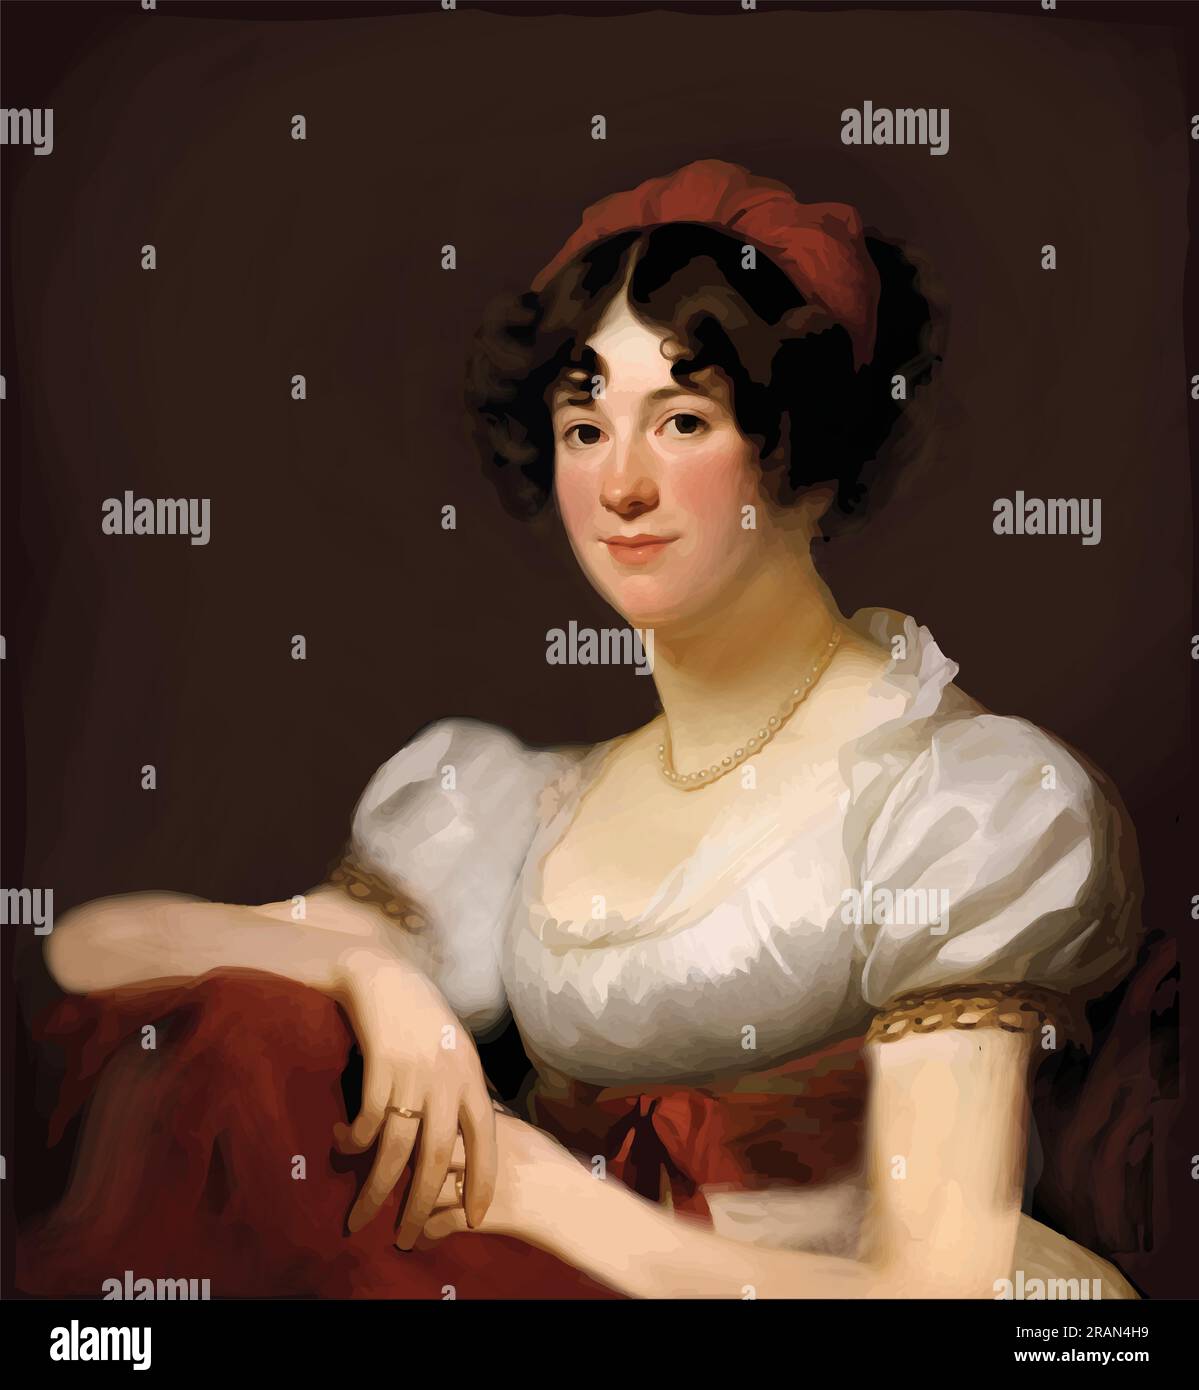 Vector painting of Dolley Madison (1768-1849), wife of James Madison, the fourth president of the United States from 1809 to 1817. Stock Vector